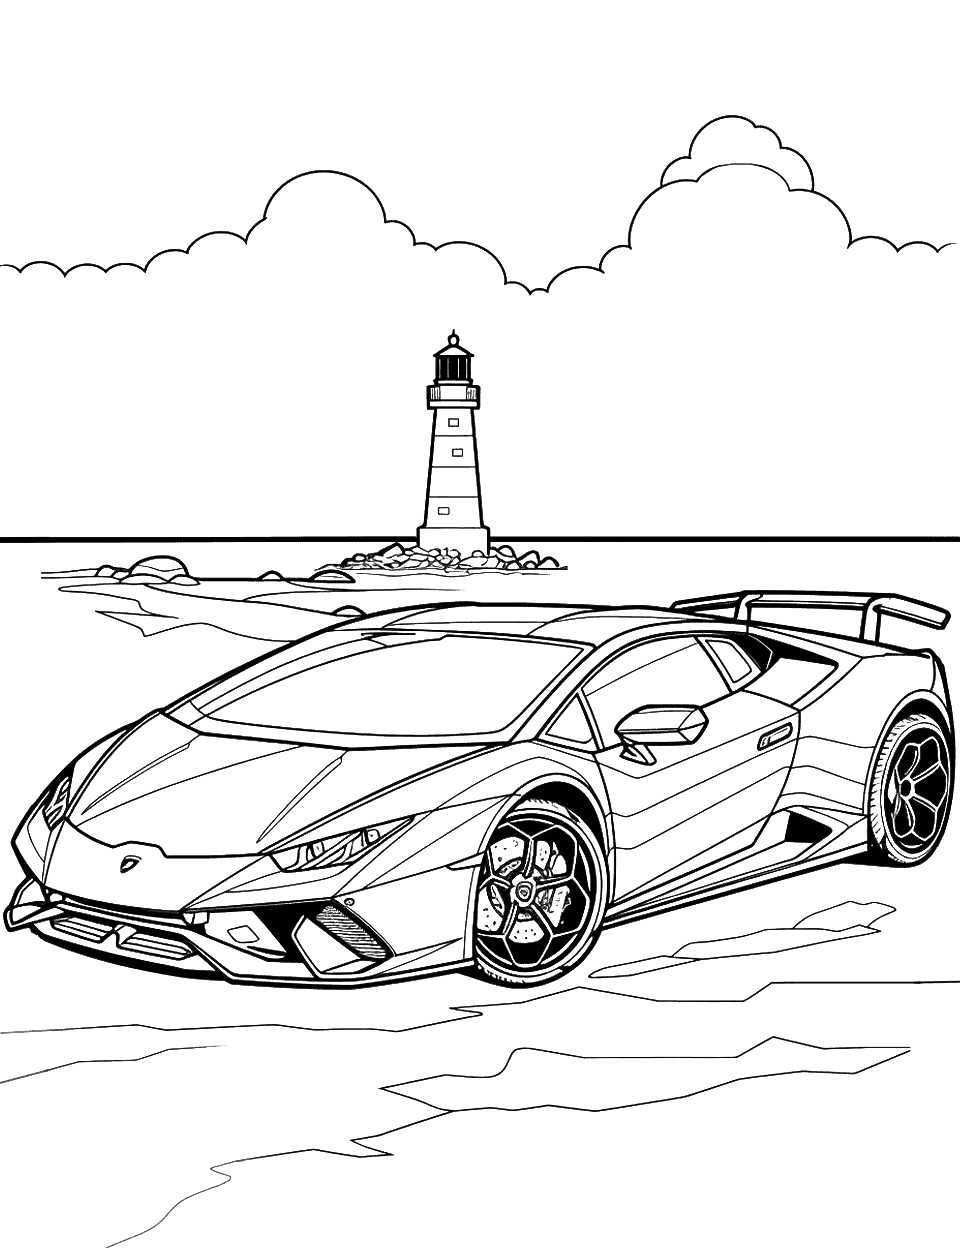 Lamborghini and the Lighthouse Coloring Page - A Lamborghini parked near a lighthouse, with the ocean in the background.